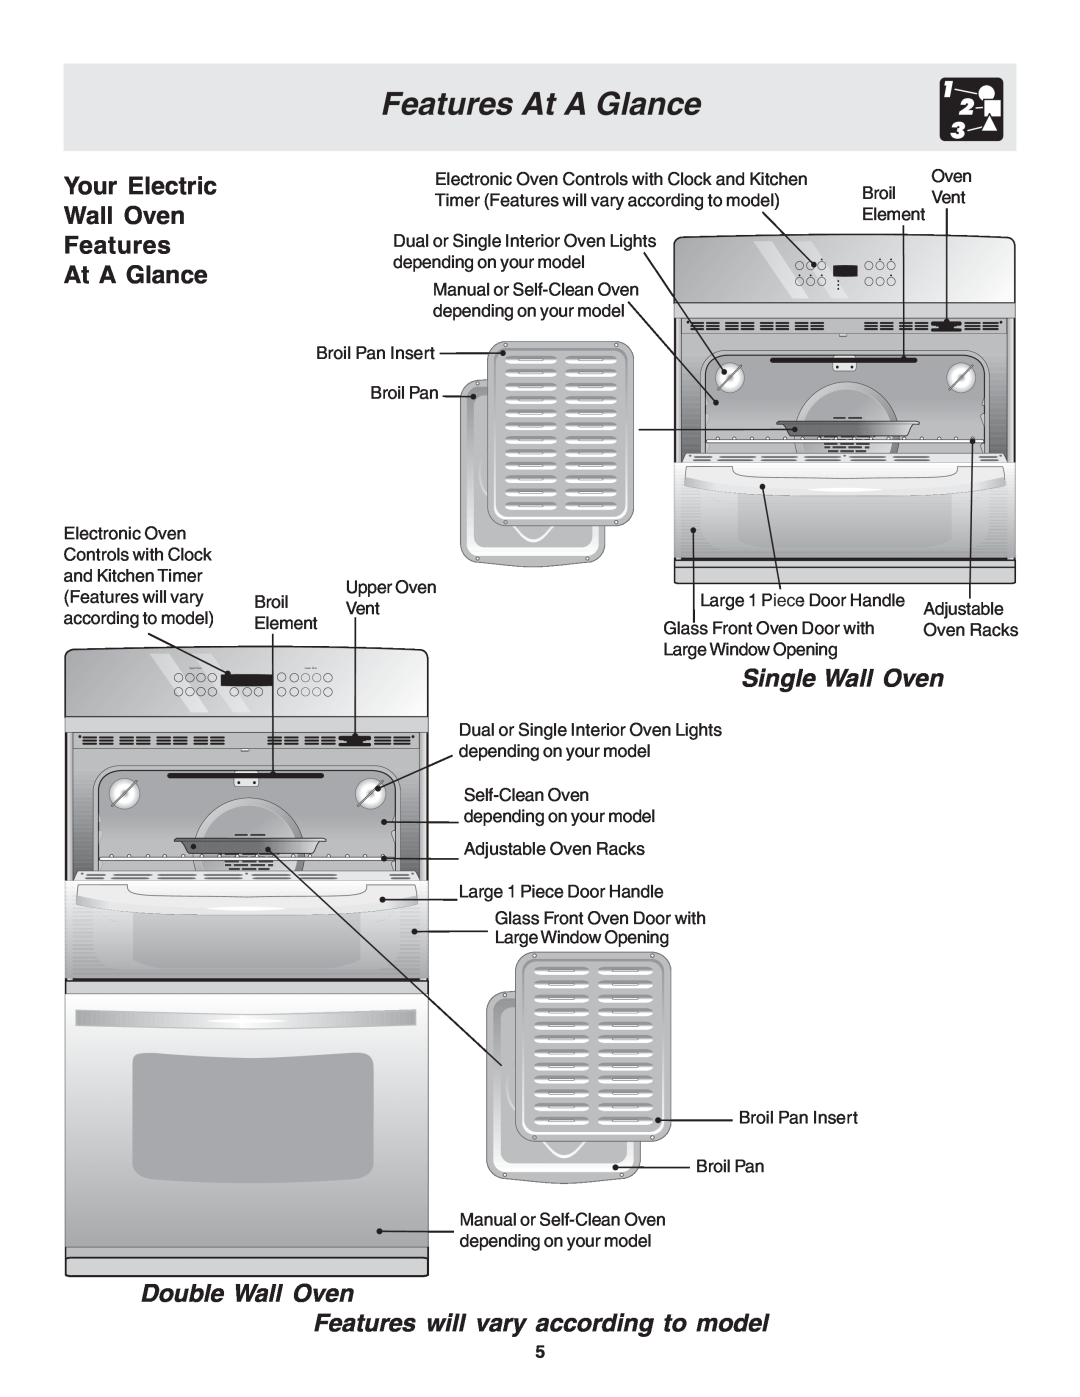 Frigidaire 318200944 manual Your Electric Wall Oven Features At A Glance, Single Wall Oven 